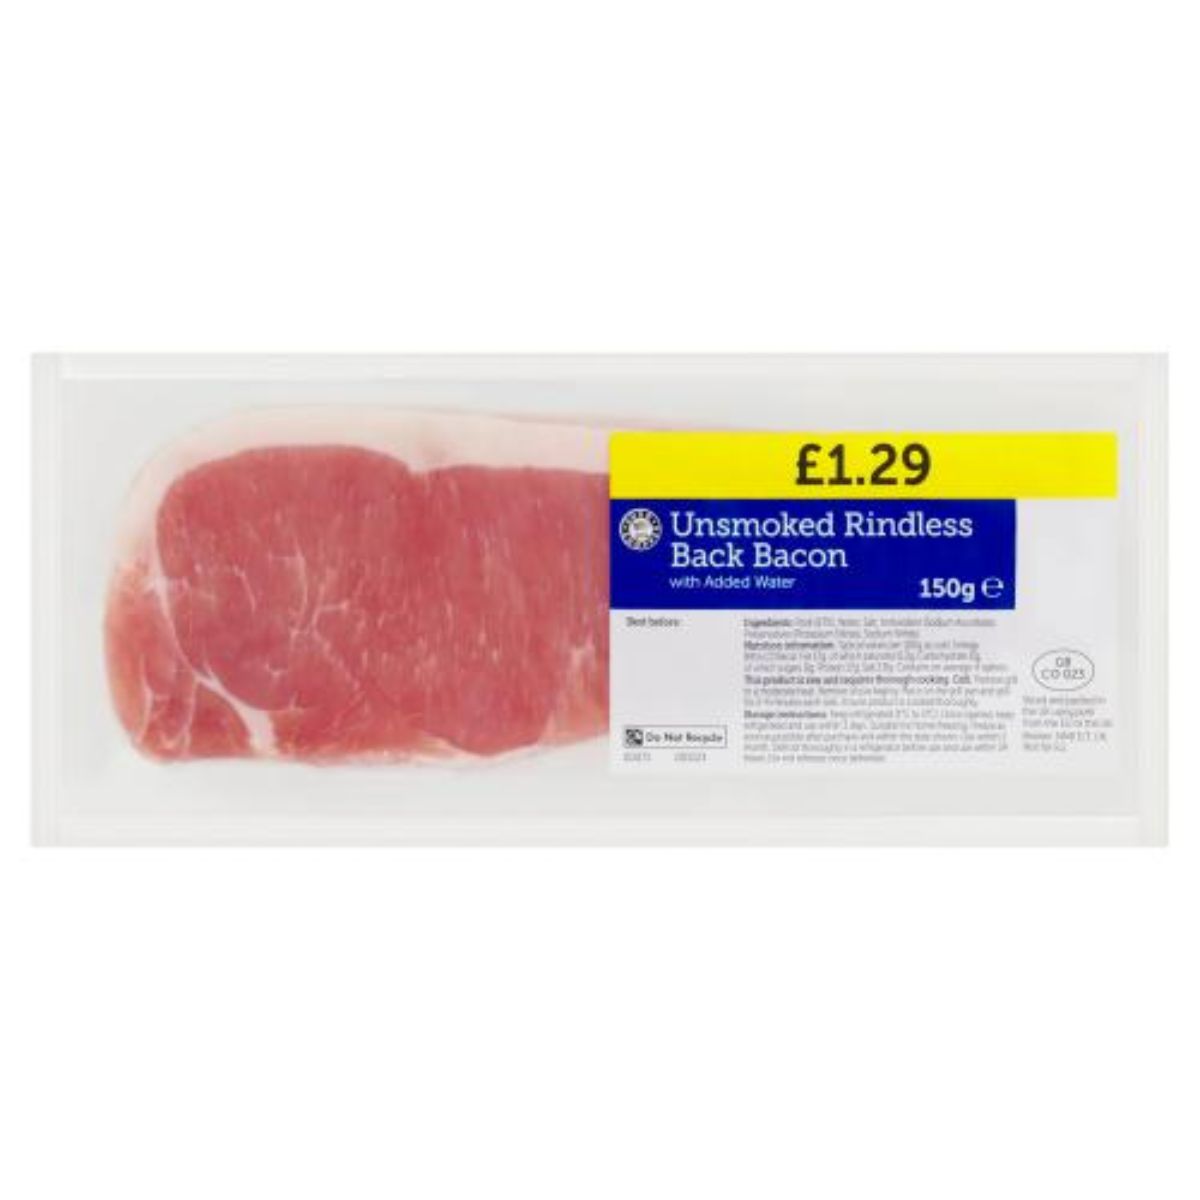 A package of Euro Shopper unsmoked bacon on a white background.